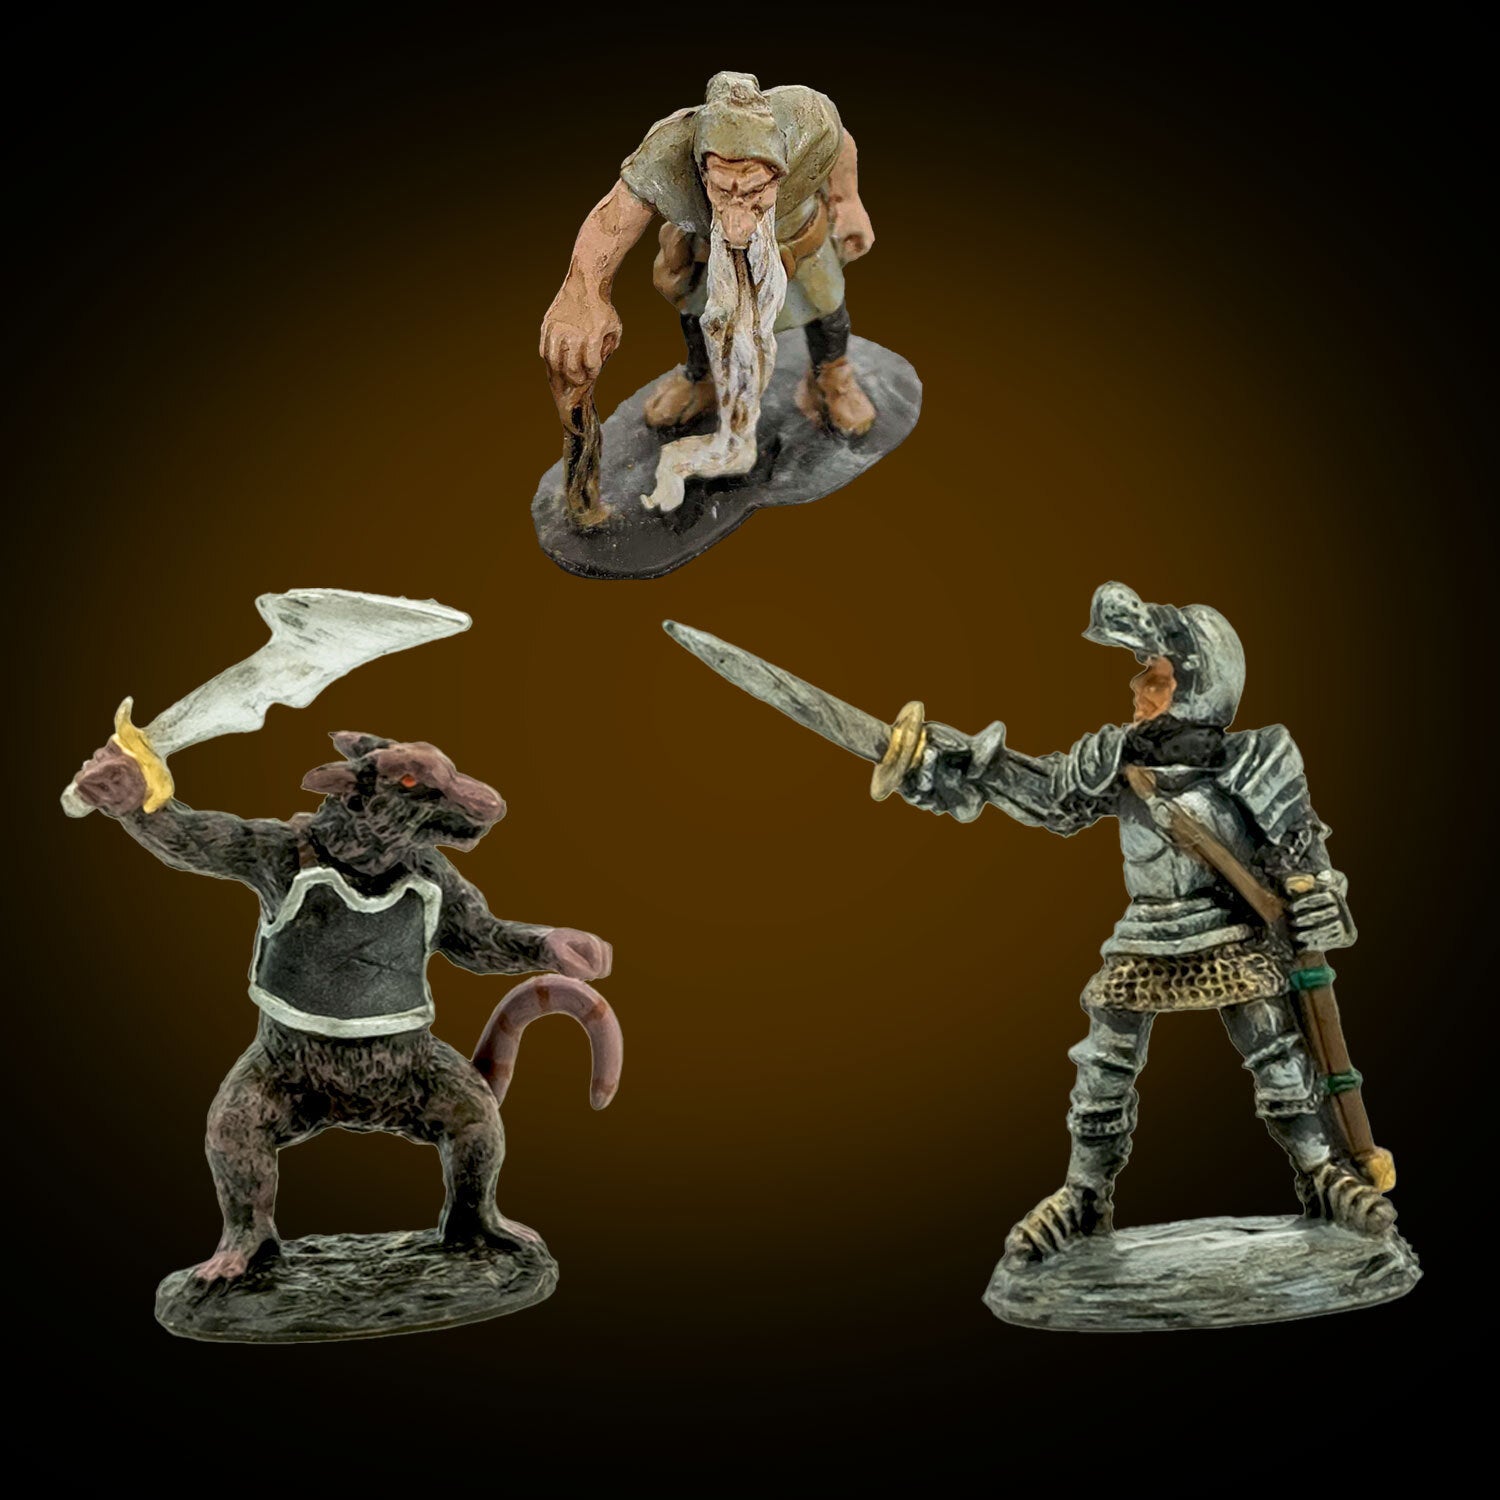 What are the Best Miniatures for D&D?